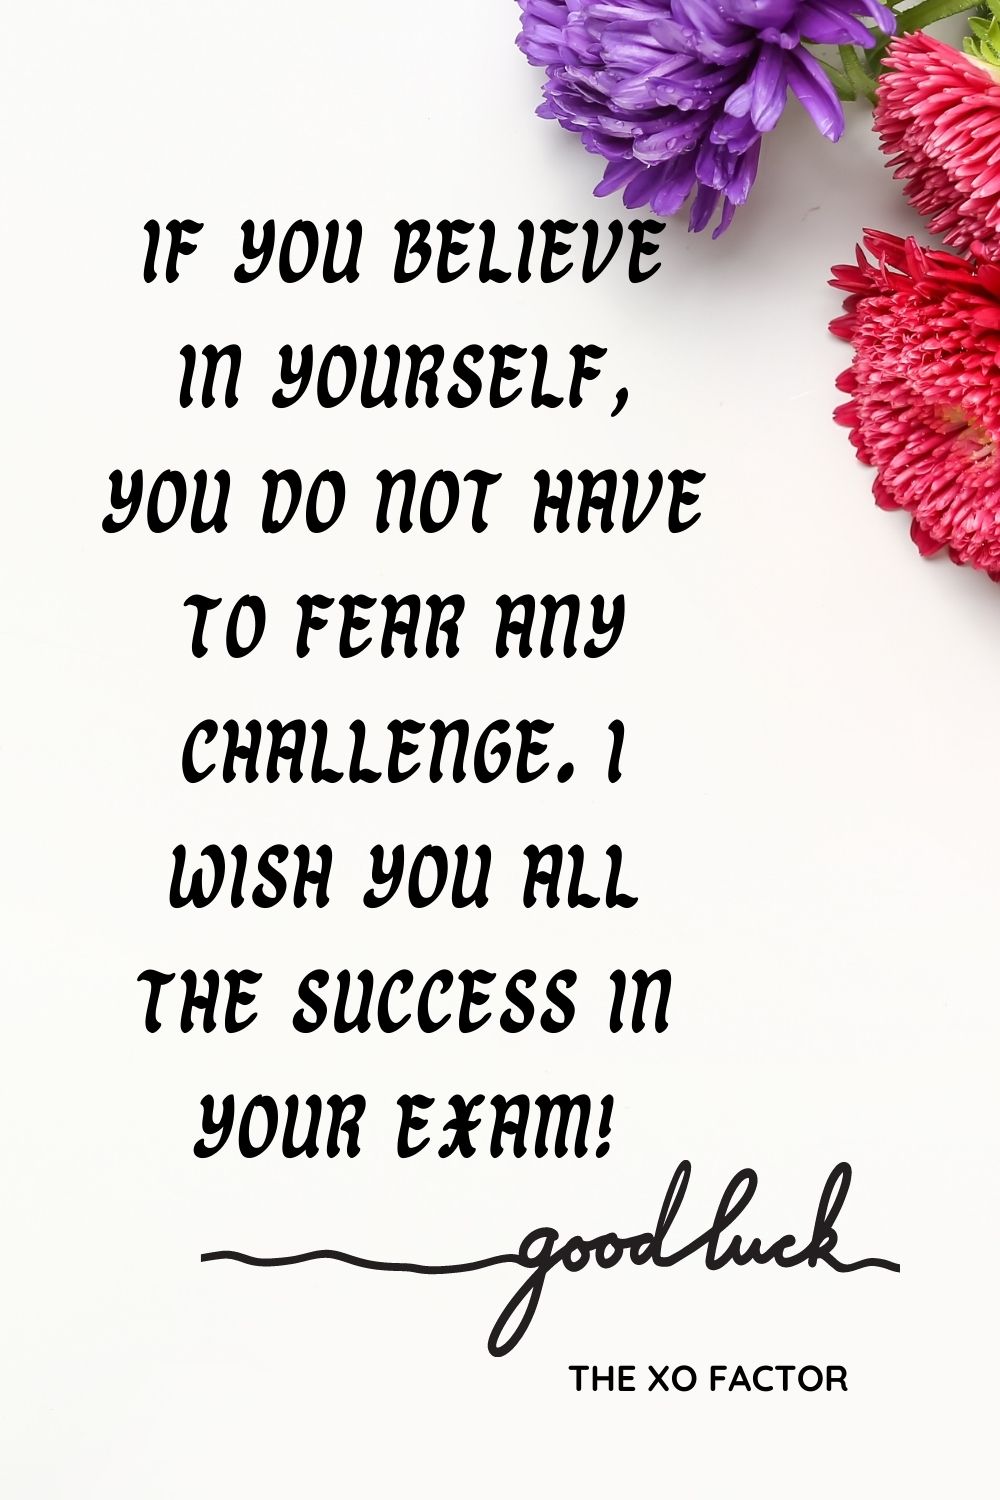 If you believe in yourself, you do not have to fear any challenge. I wish you all the success in your exam!